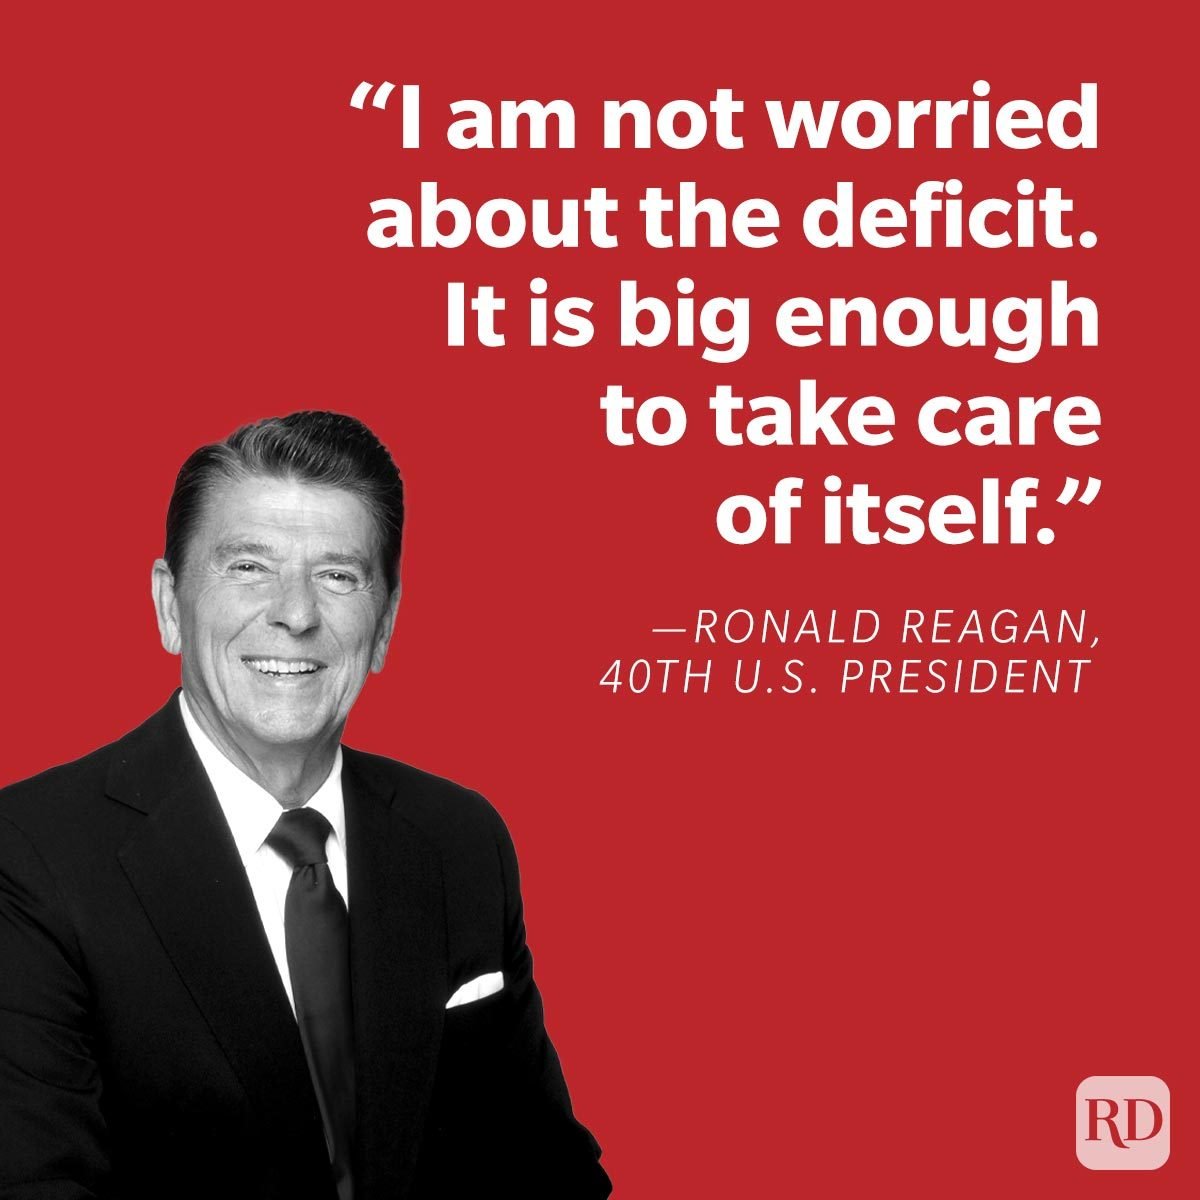 Presidential Jokes Told By U S Presidents “I am not worried about the deficit. It is big enough to take care of itself.” —Ronald Reagan, 40th U.S. president on red background